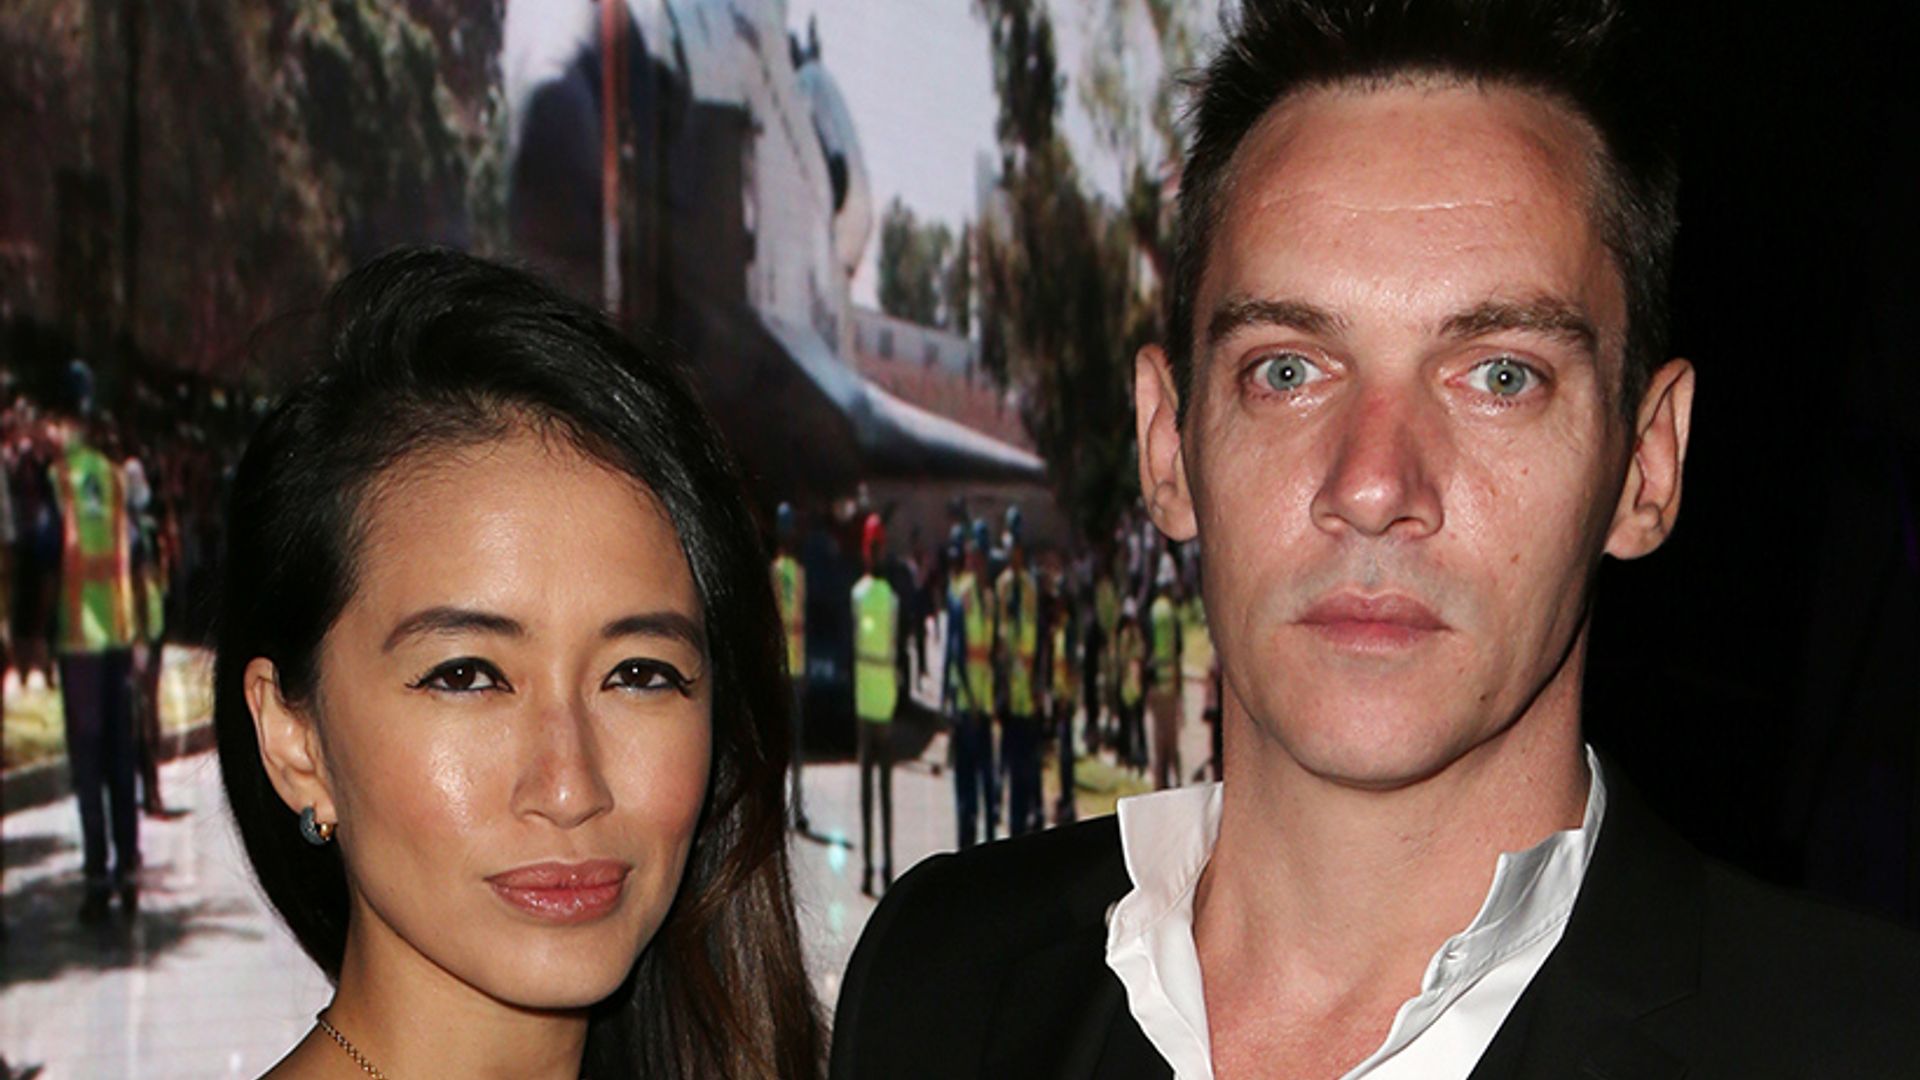 Jonathan Rhys Meyers' wife shares tragic video of doctors telling her baby has no heartbeat